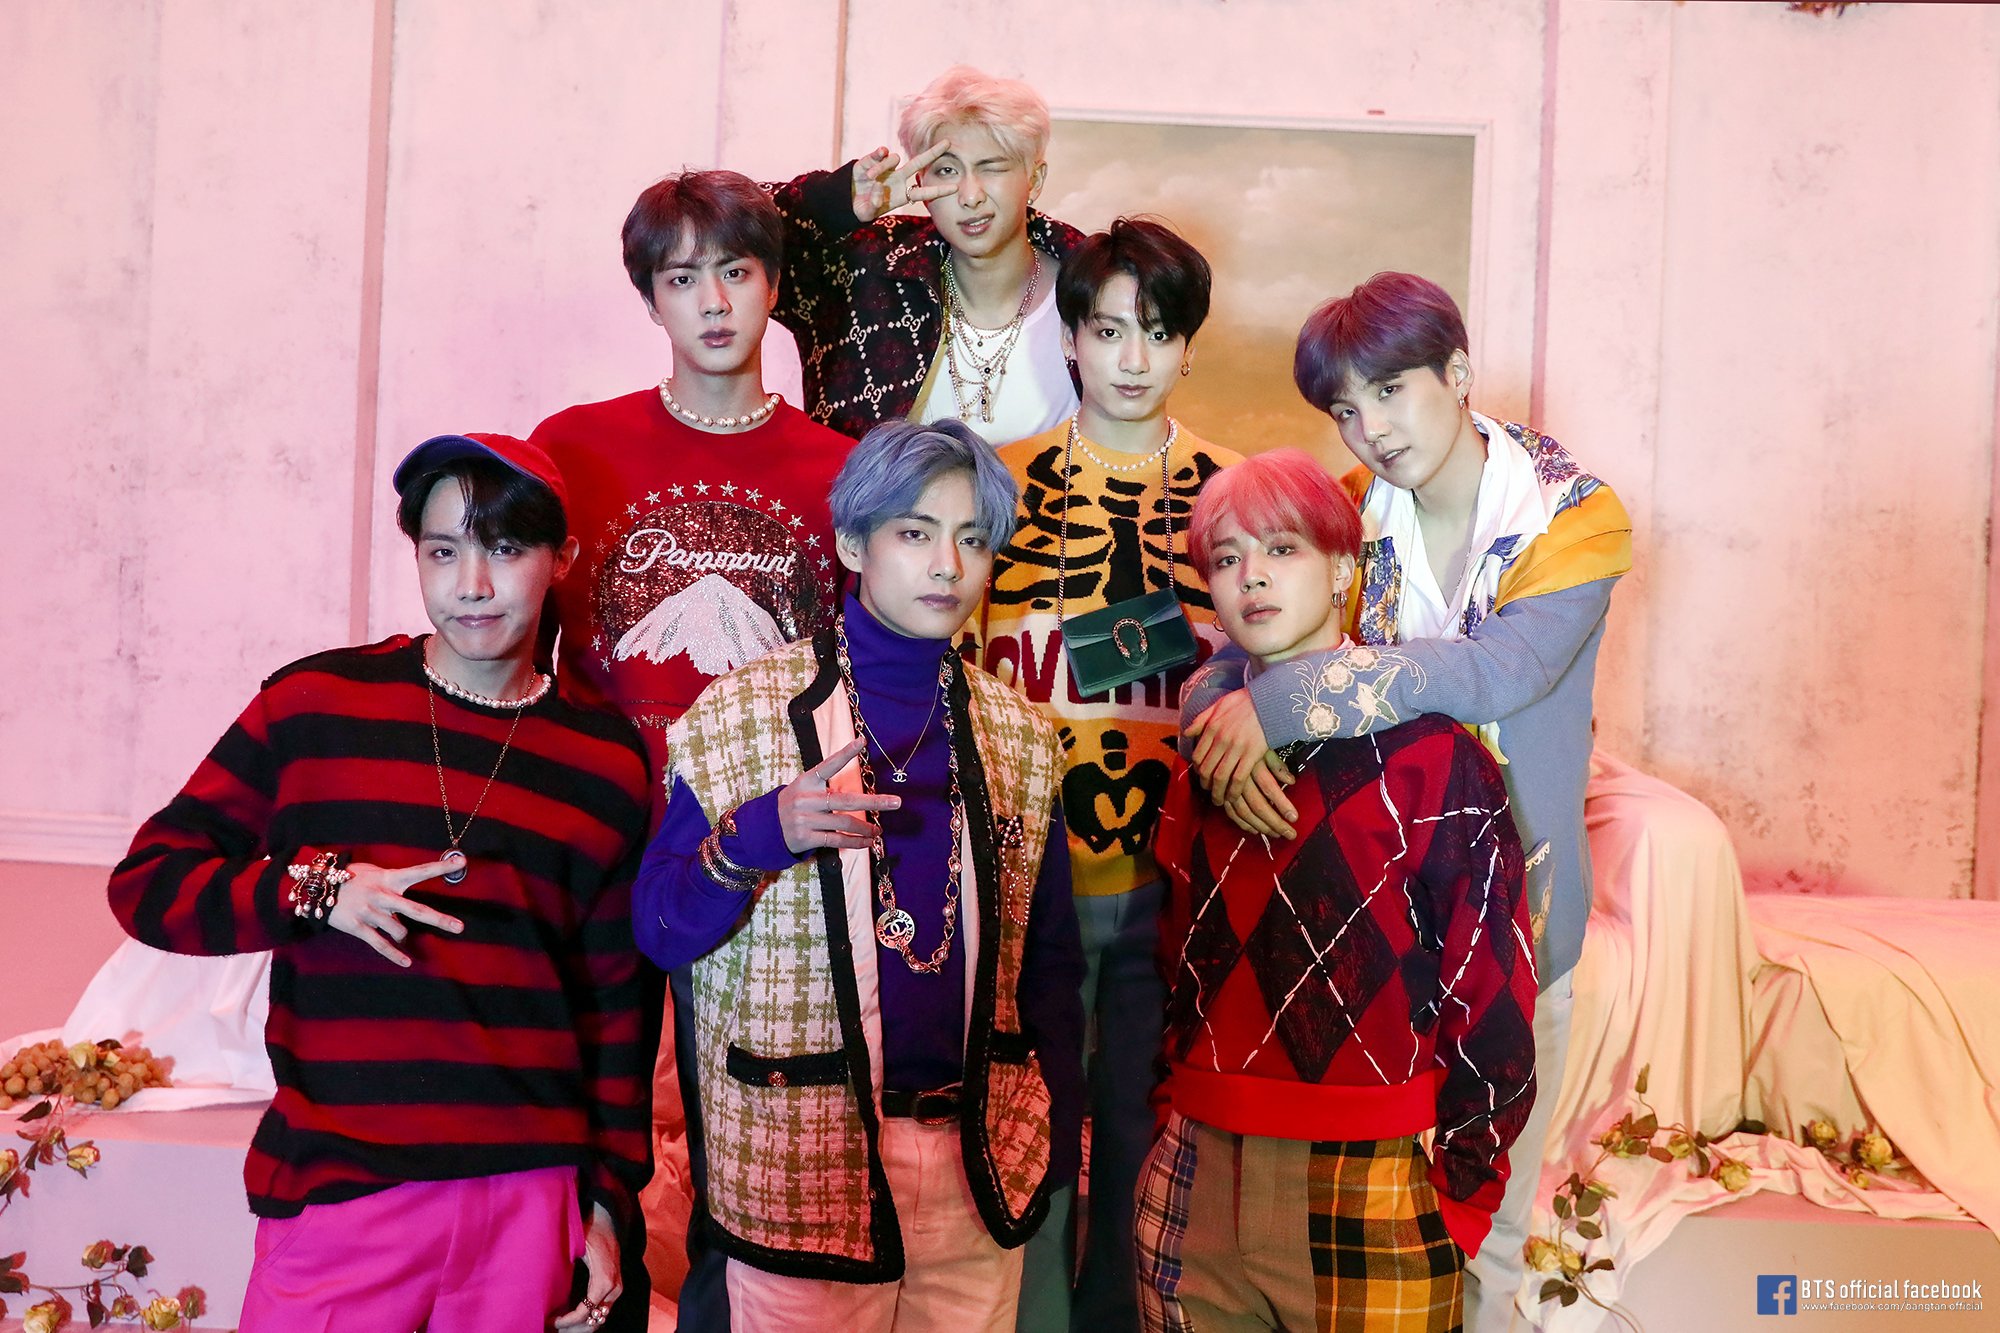 Bts Official On Twitter Bts 방탄소년단 Map Of The Soul Persona Persona Concept Photo Sketch 2 Https T Co 2aqyfmunnu